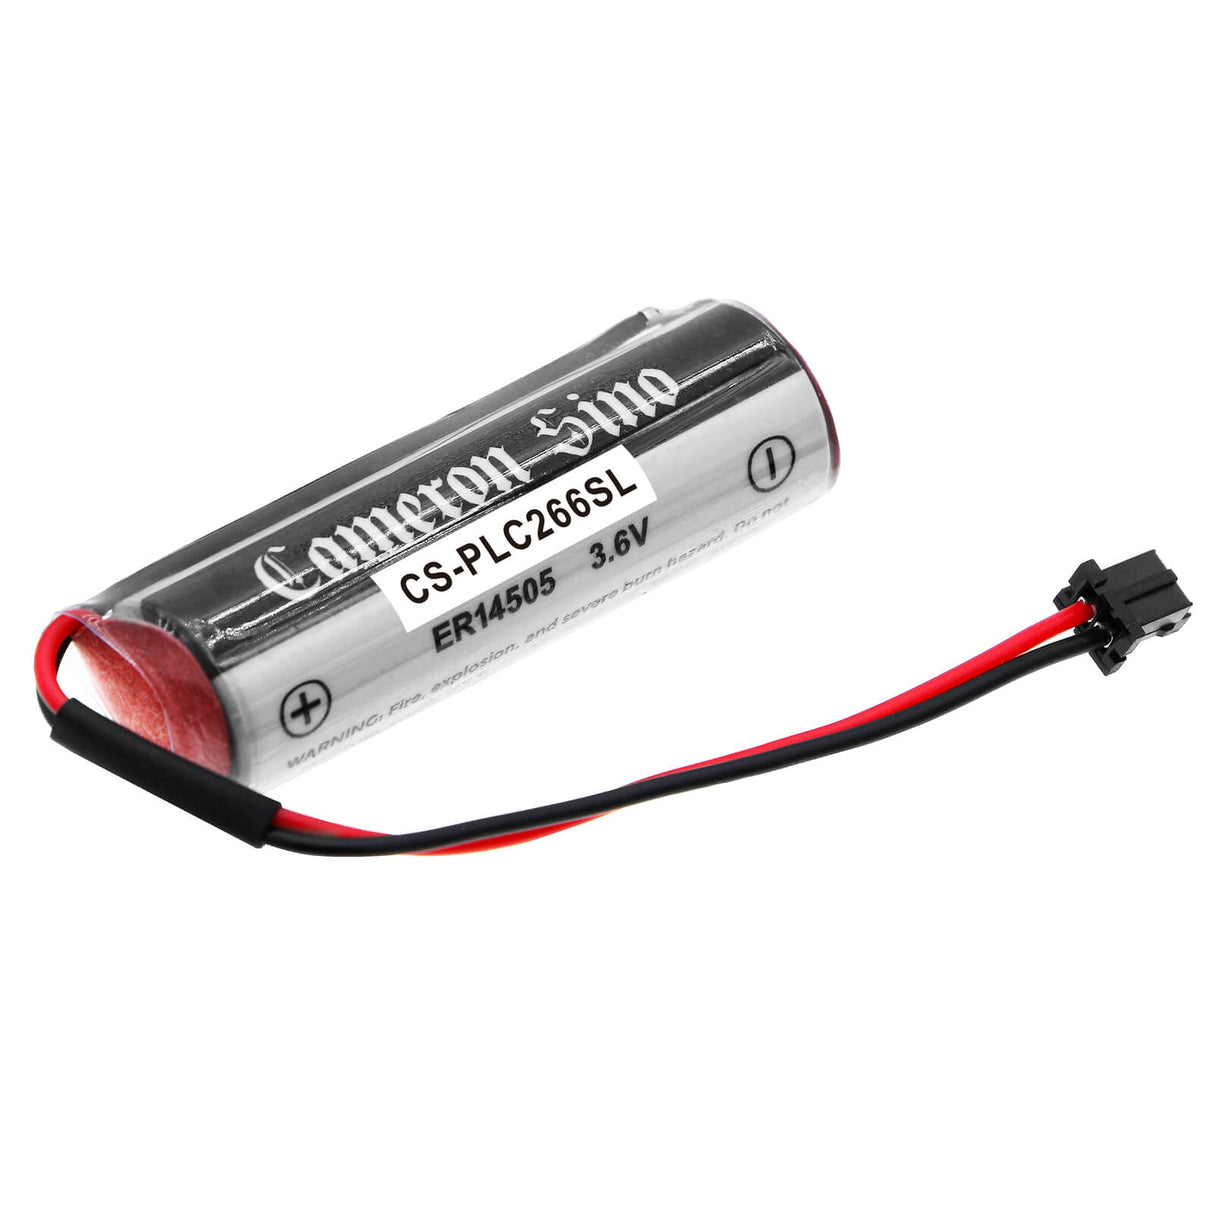 Battery For Toshiba, Er6vc119a, Er6vc119b 3.6v, 2600mah - 9.36wh Batteries for Electronics Cameron Sino Technology Limited   